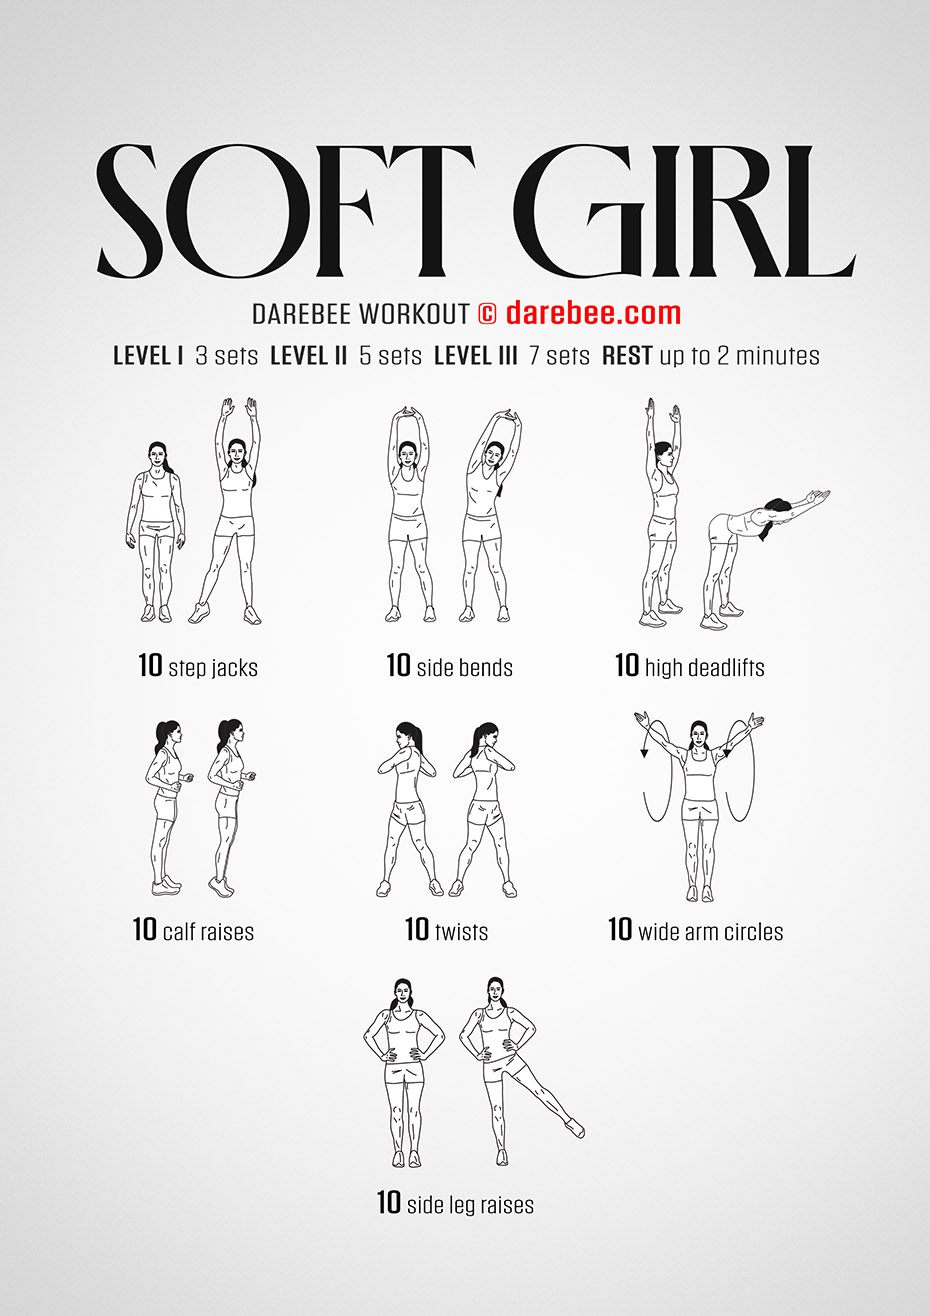 Soft Girl is a Darebee home-fitness virtually total body aerobic and cardiovascular workout.